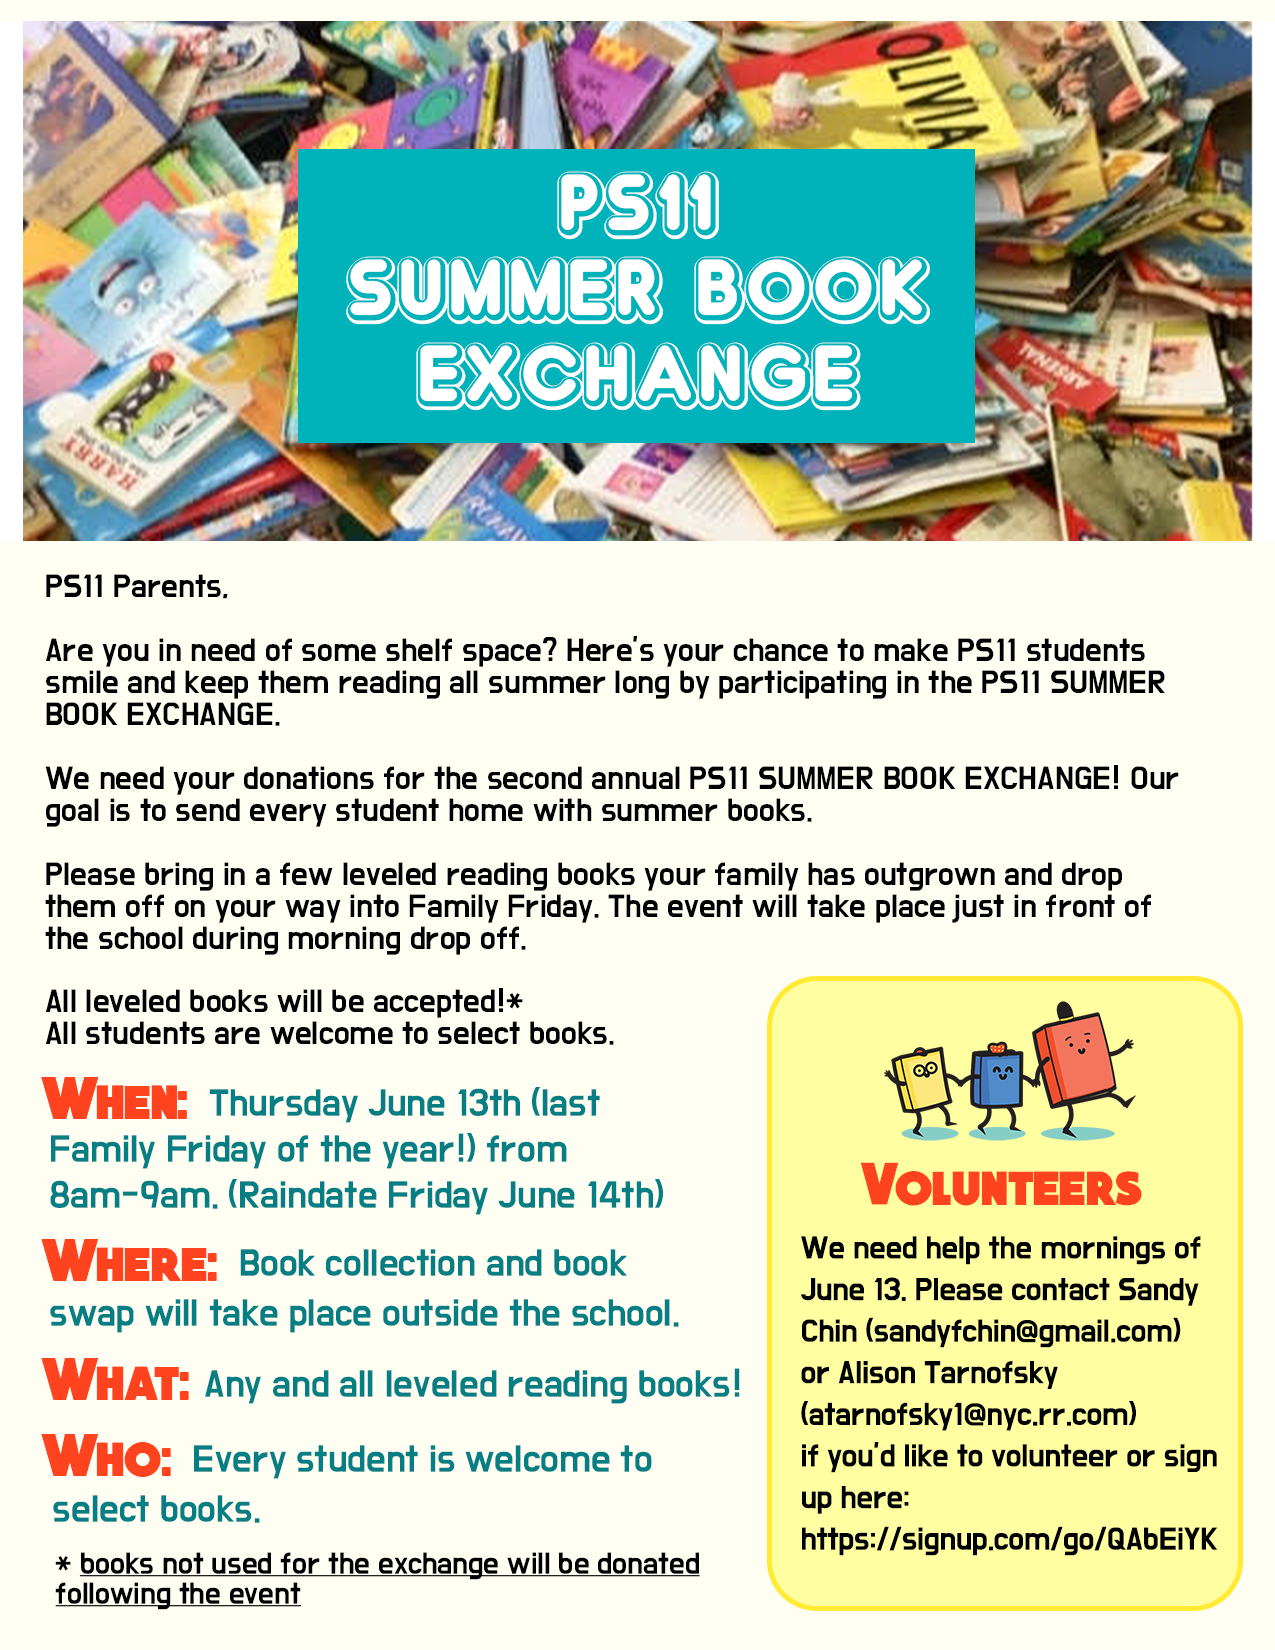 Parents:  Are you in need of some shelf space?  Here's your chance to make PS11 students smile and keep them reading all summer long by participating in the PS11 Summer Book Exchange.

We need your donations for the second annual PS11 Summer Book Exchange!  Our goal is to send every student home with summer books. 

Please bring in a few leveled reading books your family has outgrown and drop them off on your way into Family Friday.  The event will take place just in front of the school during morning drop off.  

All leveled books will be accepted!* . All students are welcome to select books.

WHEN: Thursday June 13th (lst Family Friday of the year!) from 8am-9am (raindate Friday June 14th)

WHERE:  Book collection and book swap will take place outside the school

WHAT:  Any and all leveled reading books!

WHO:  Every student is welcome to select books 

* books not used for the exchange will be donated following the event

Volunteers:  We need help the morning of June 13.  Please contact Sandy Chin (sandyfchin@gmail.com) or Alison Tarnofsky (atarnofsky1@nyc.rr.com) . If you'd like to volunteer, sign up here:  https://signup.com/go/QAbEiYK
10 minutes before, as email
10 minutes before
Organizer: PS11 Calendar
PS11 Calendar